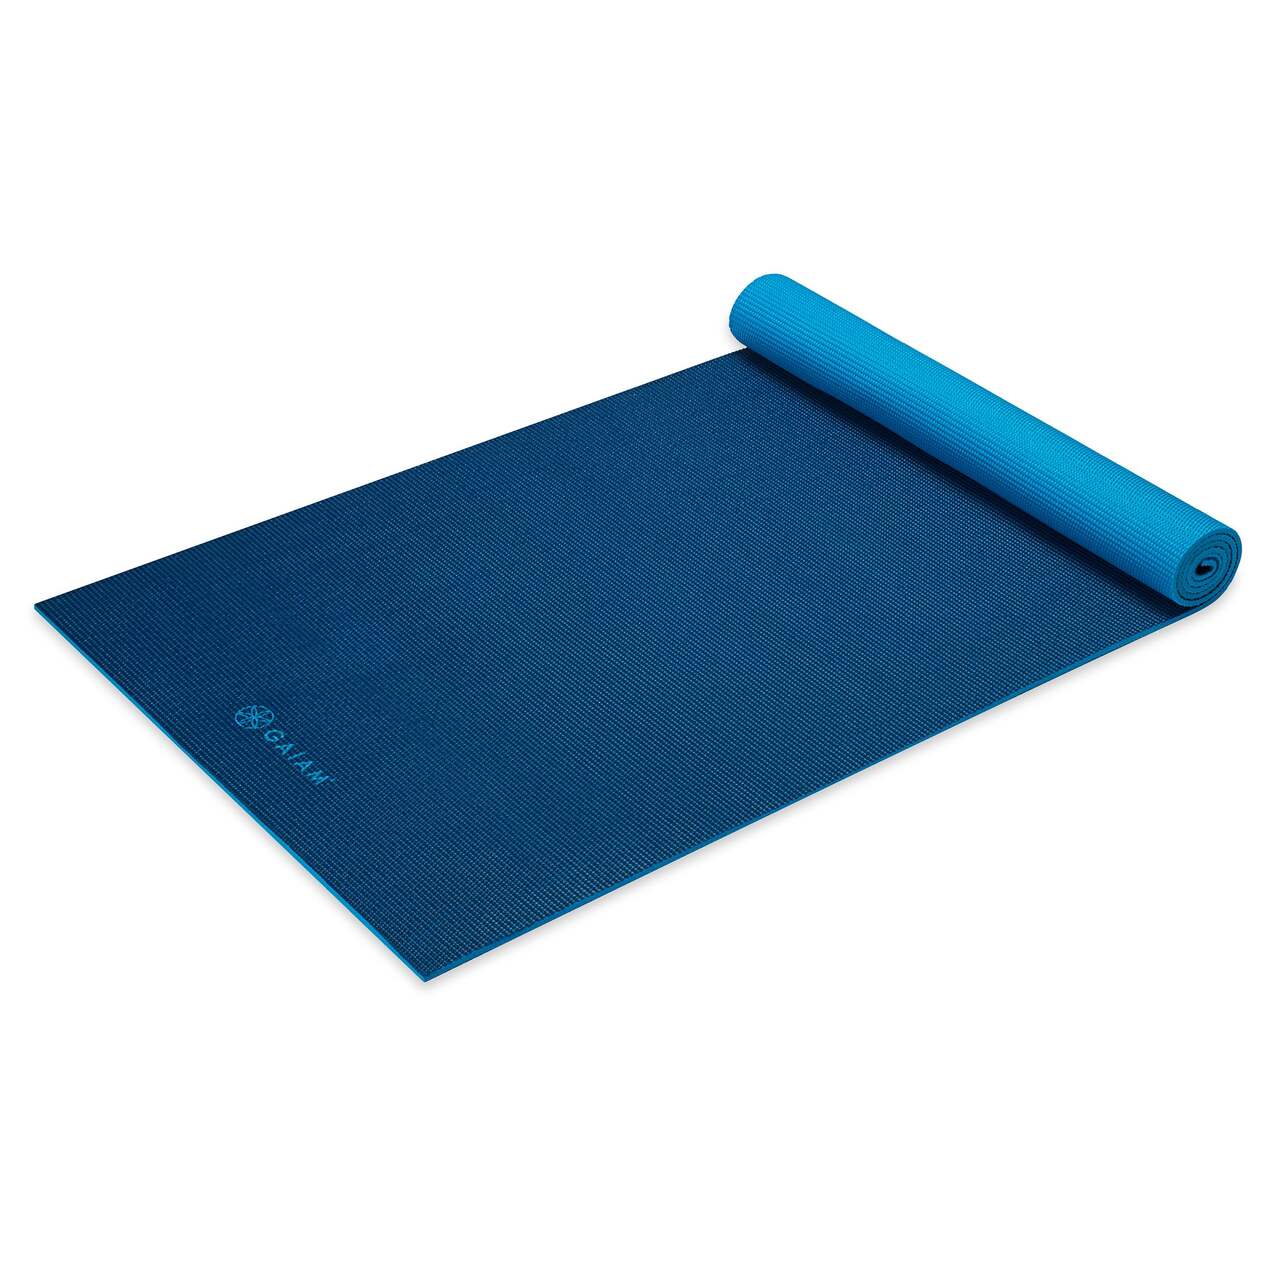 https://media-www.canadiantire.ca/product/playing/exercise/exercise-accessories/1841615/gaiam-4mm-reversible-yoga-mat-and-sling-blue-blue-aabe33cd-61af-402f-9a4a-43d8f69cefc9-jpgrendition.jpg?imdensity=1&imwidth=640&impolicy=mZoom